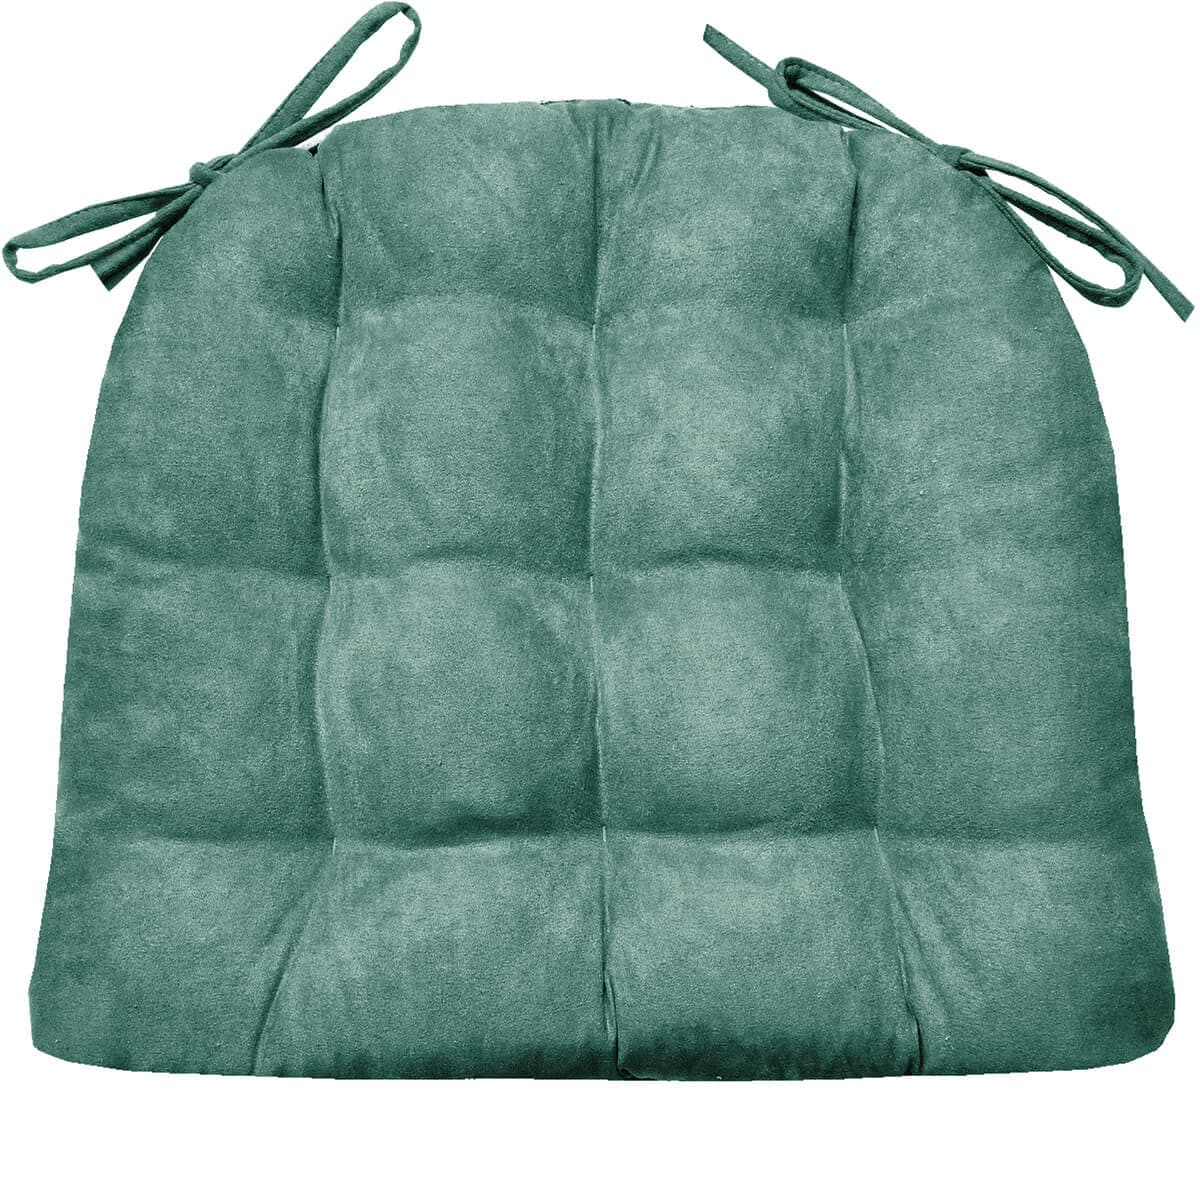 Southwest Laramie Chair Cushion Reverse to Microsuede Turquoise